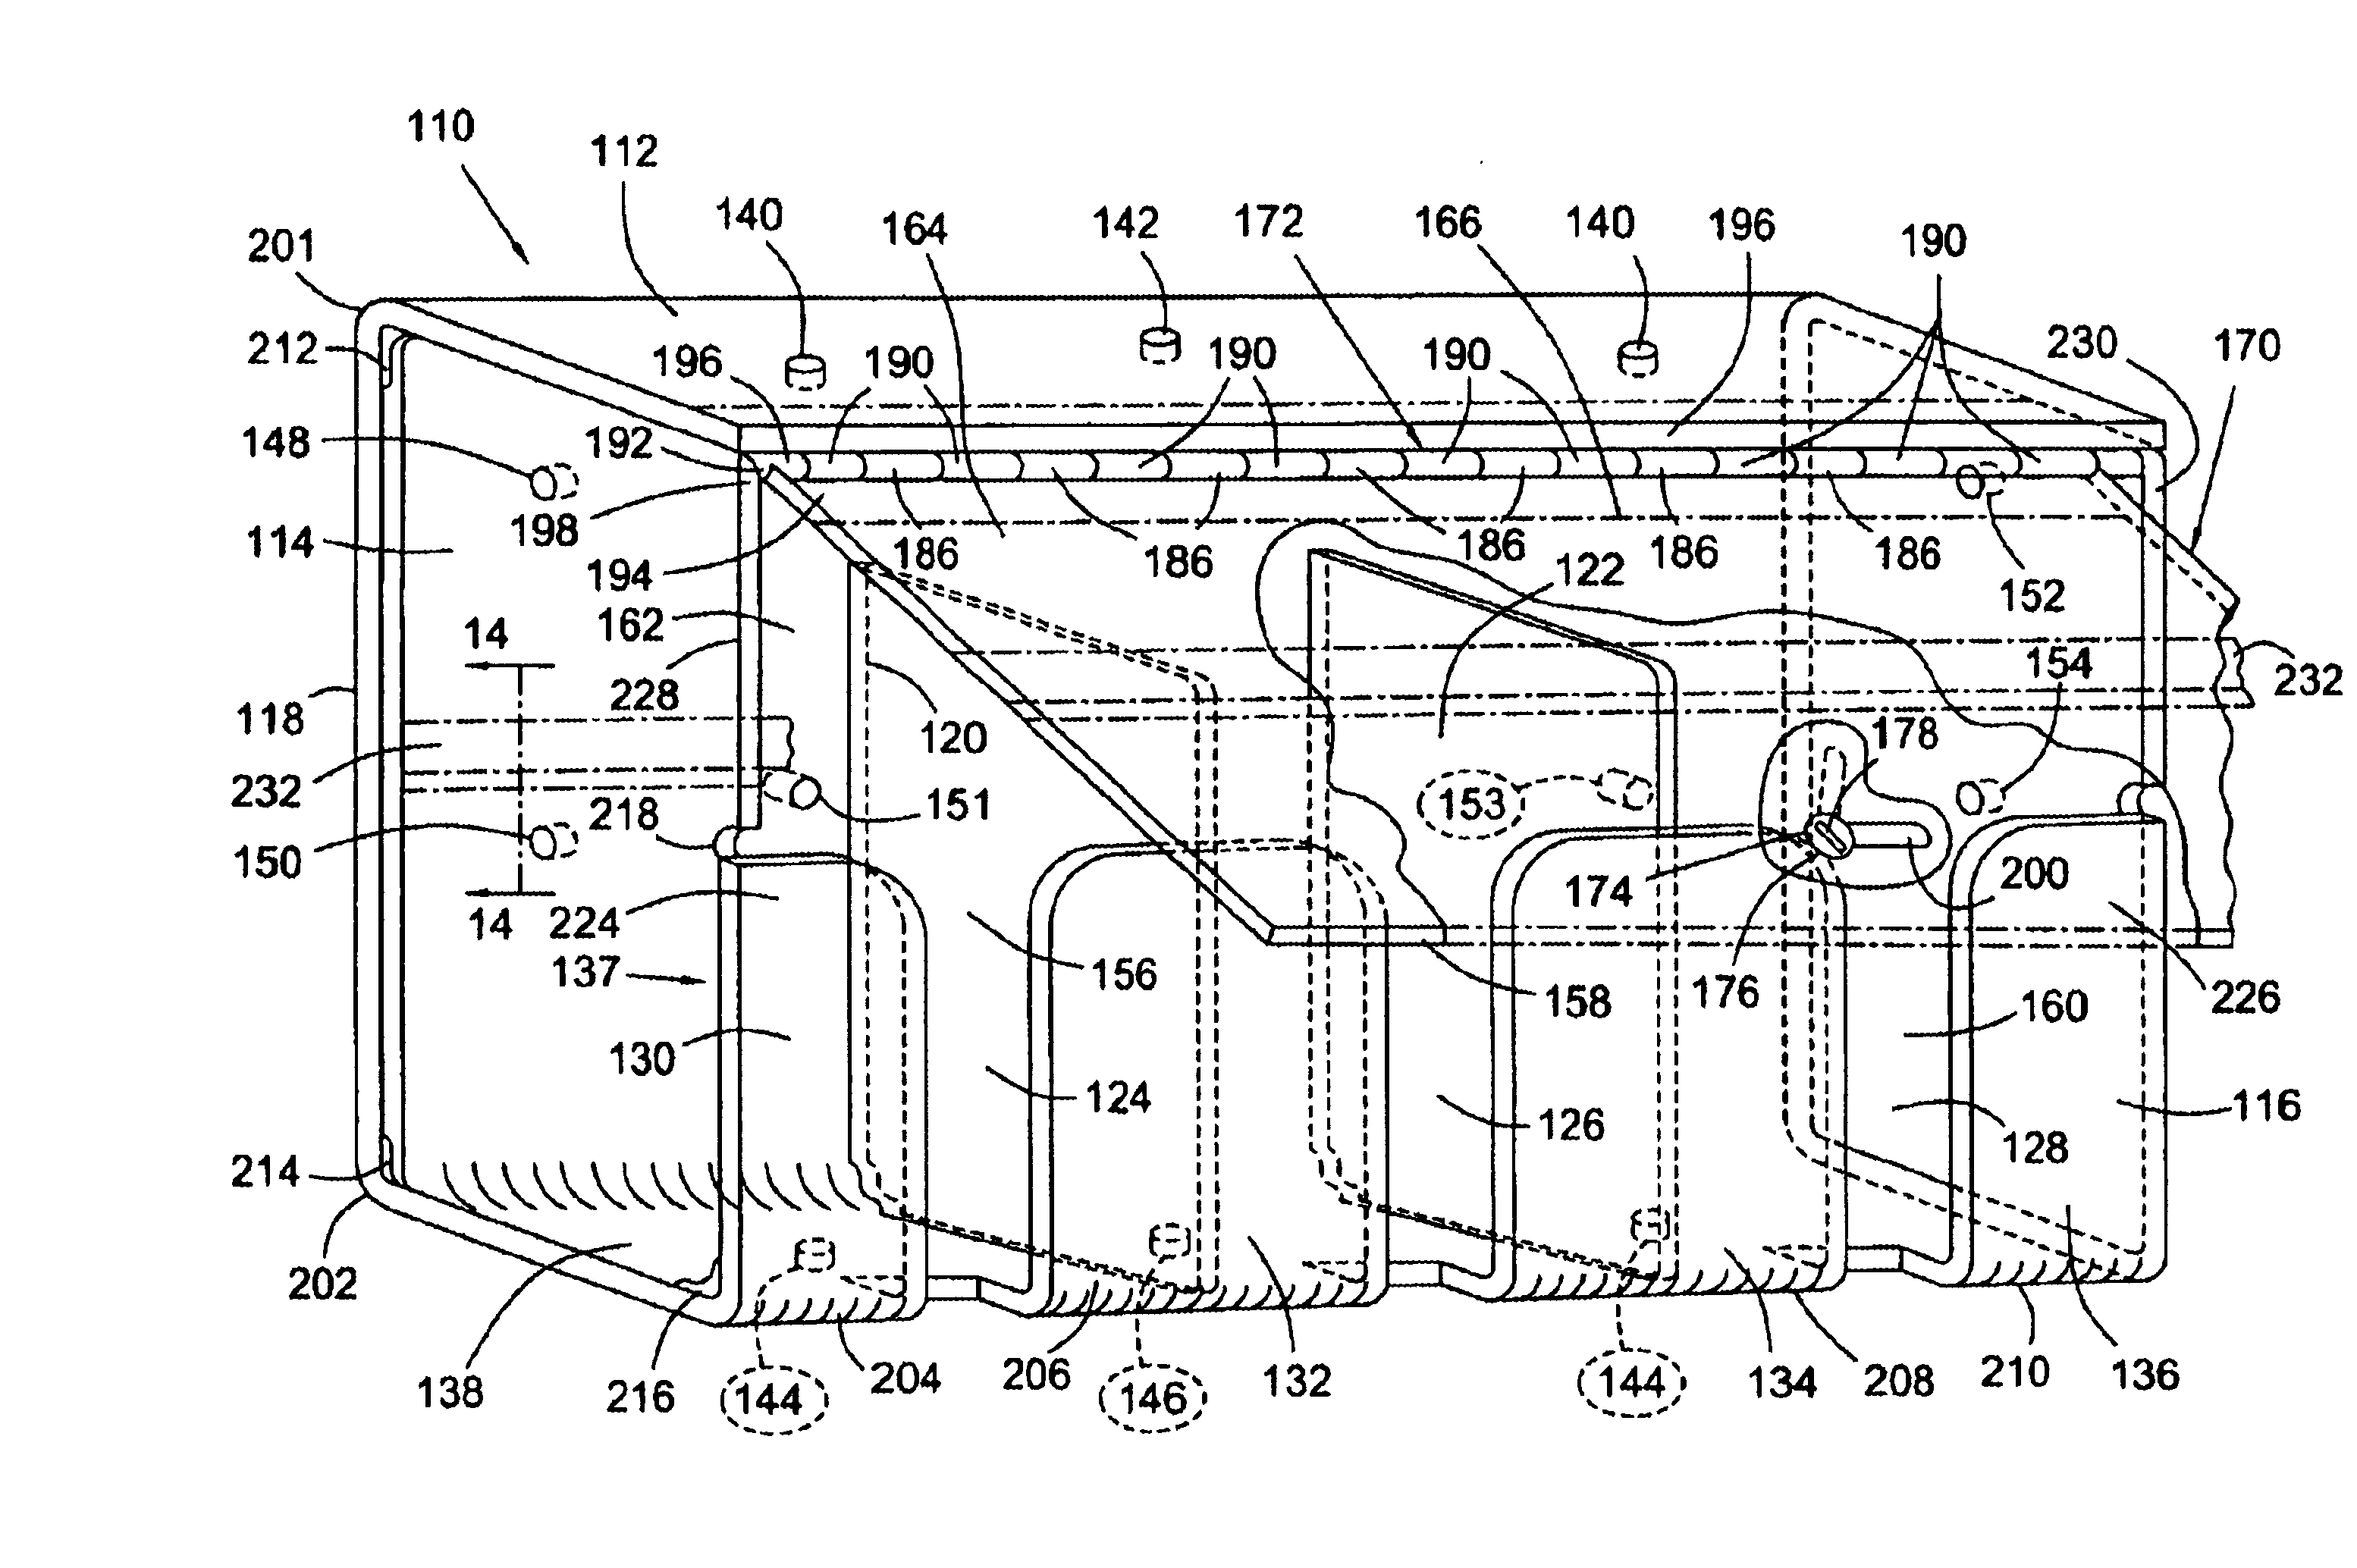 Storage and display units for cards and the like and methods of making same